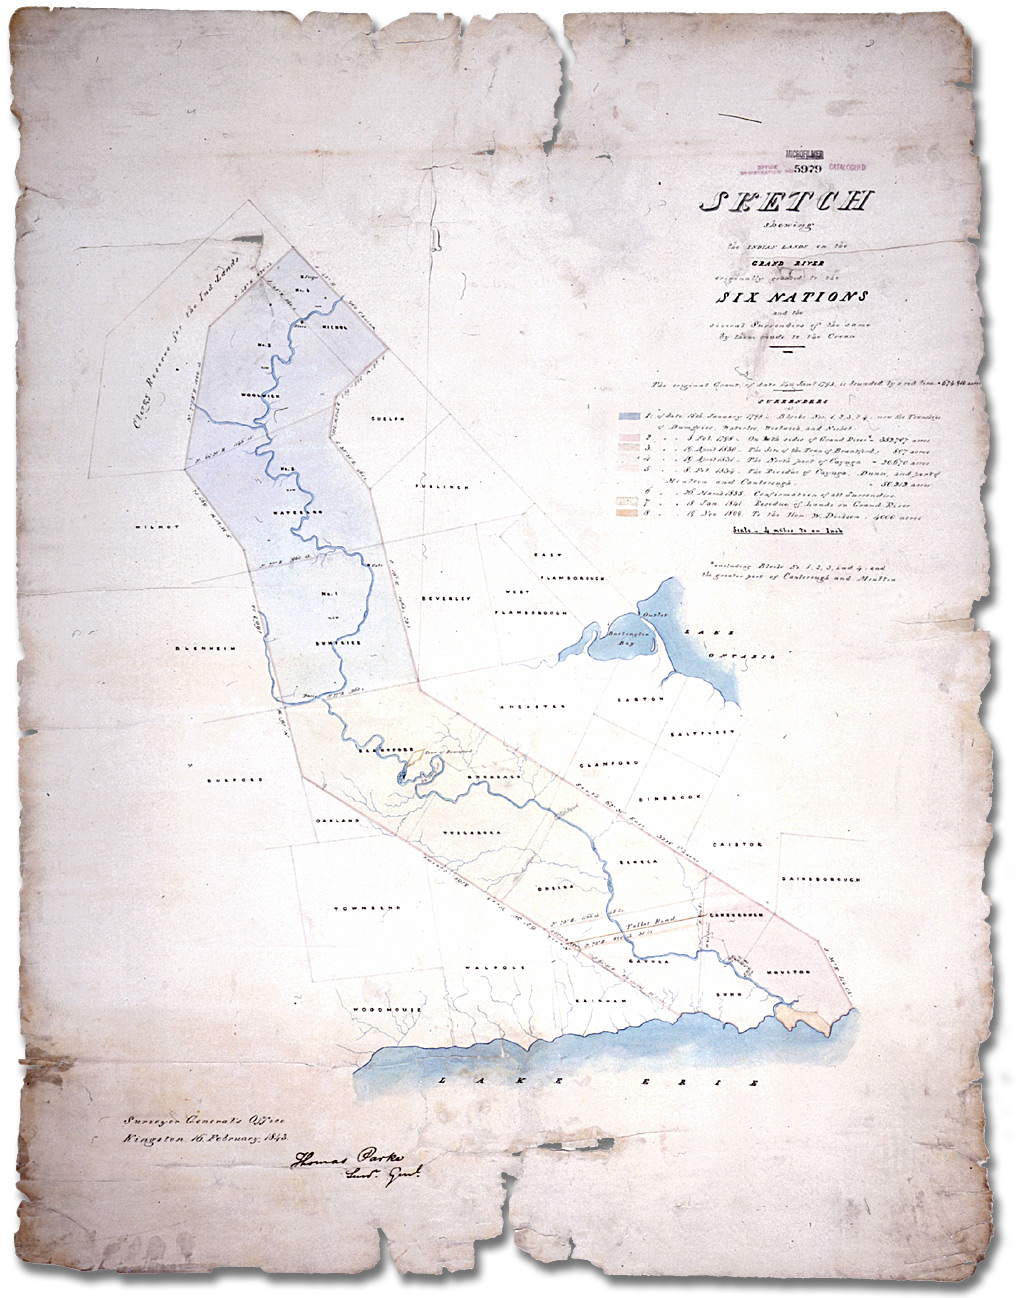 Sketch showing the Indian Lands on the Grand River originally granted to the Six Nations